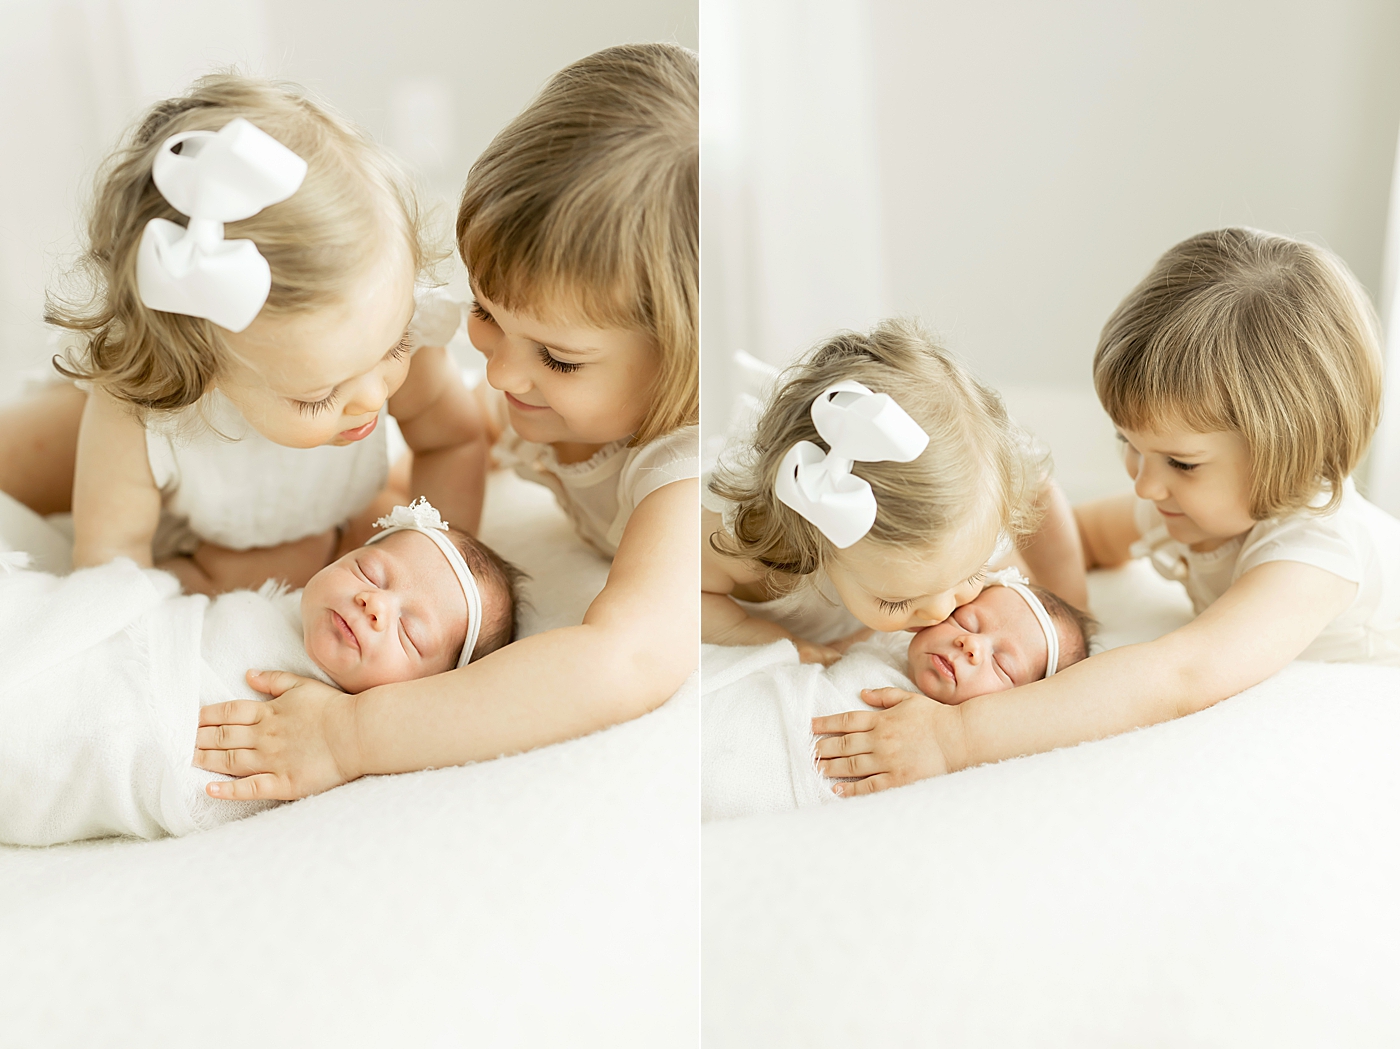 Two big sisters adoring their new baby sister. Photos by Fresh Light Photography.